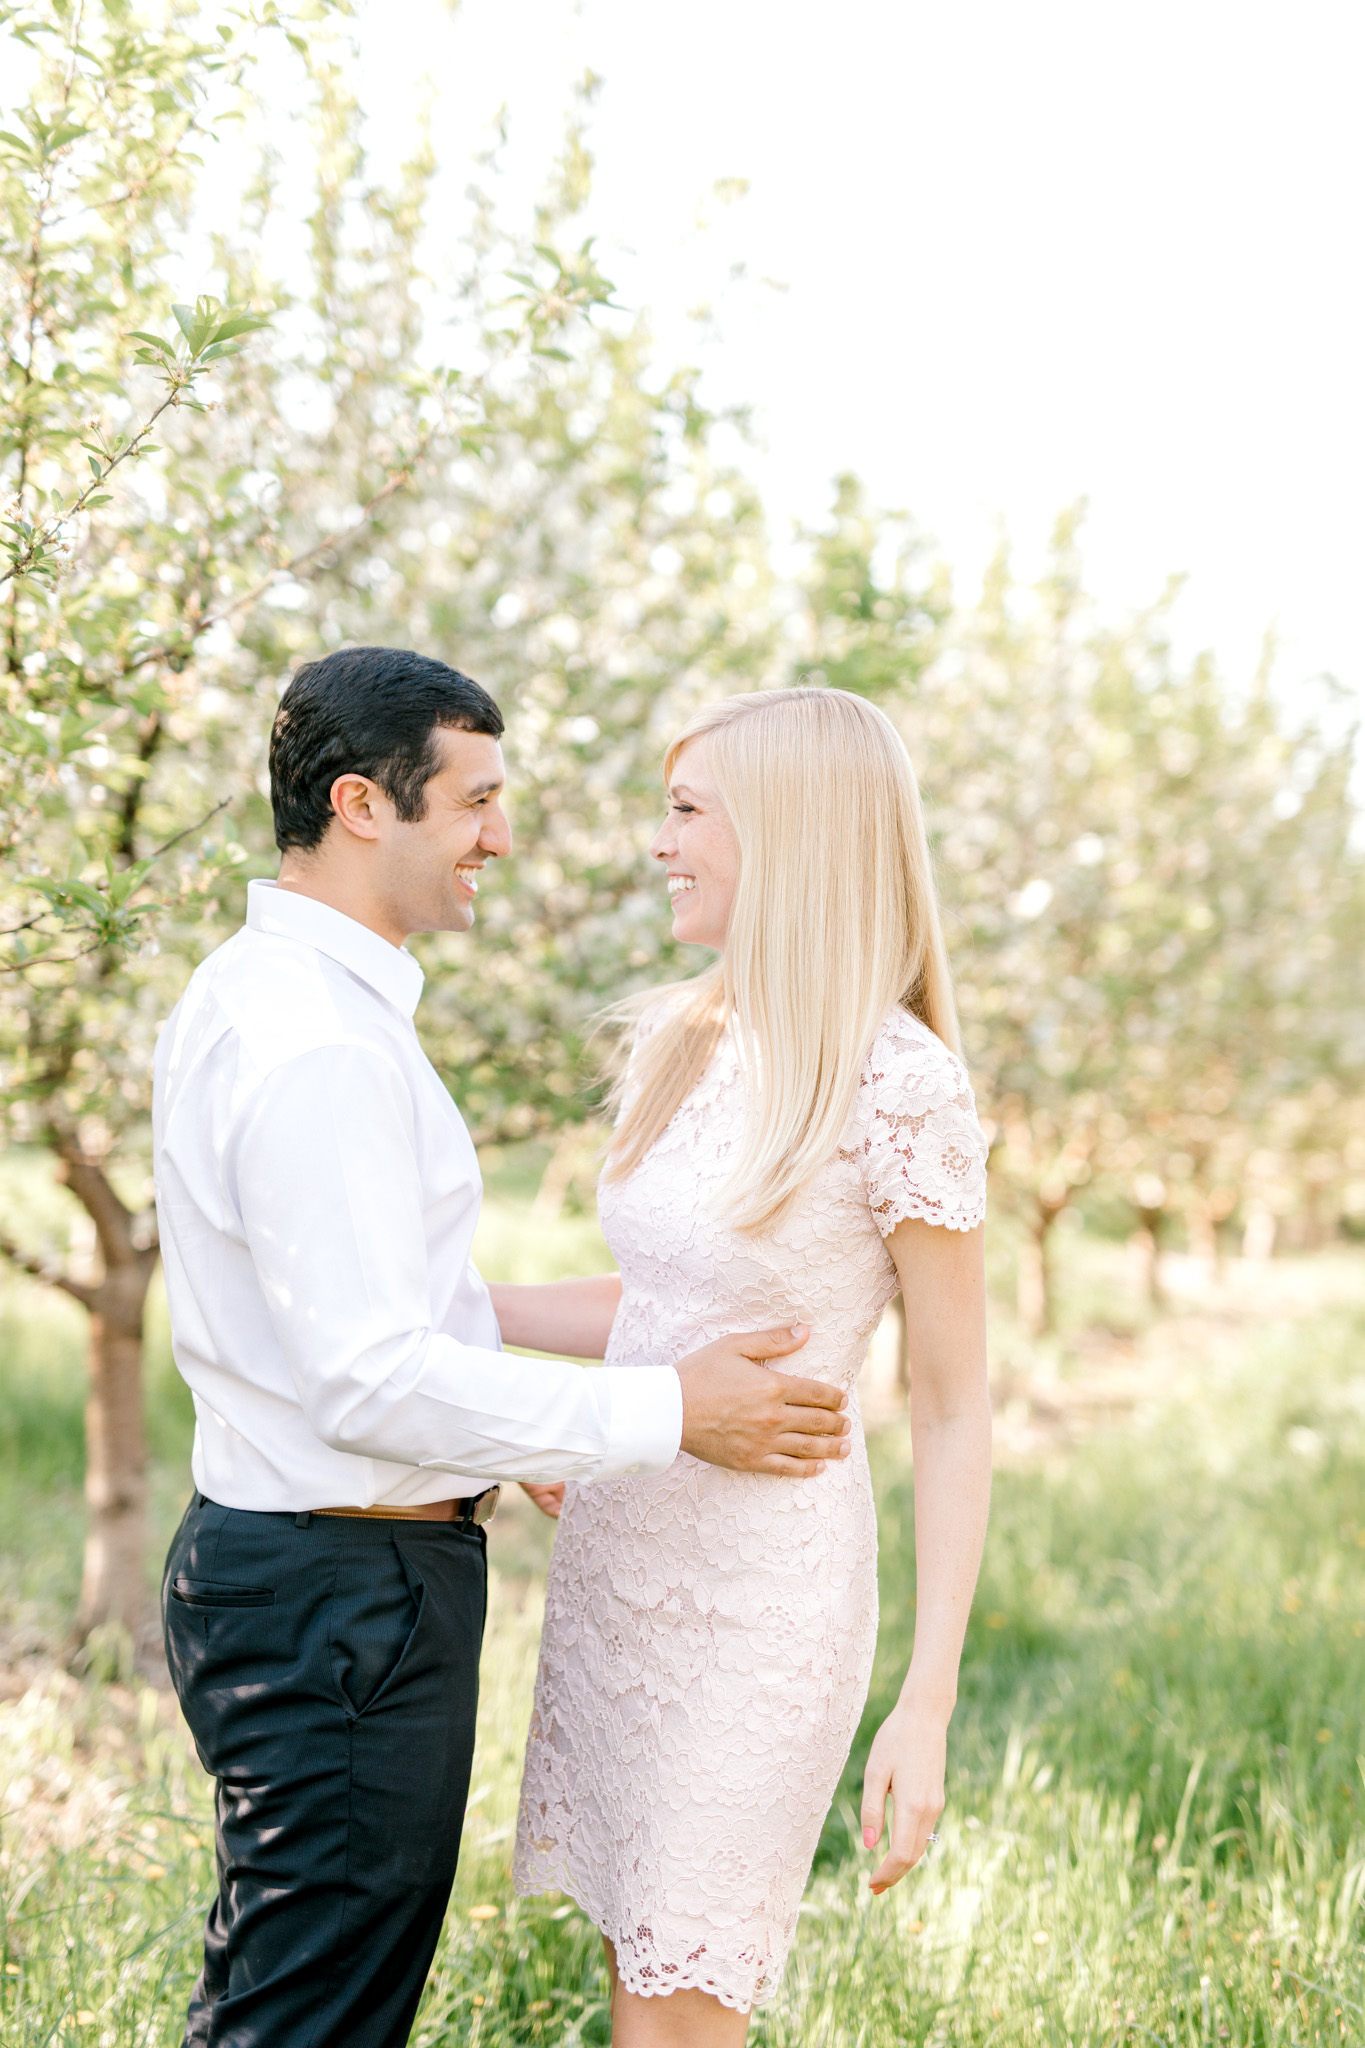 A sweet spring engagement session at the orchard | laurenda marie photography | west michigan weddings | west michigan engagement